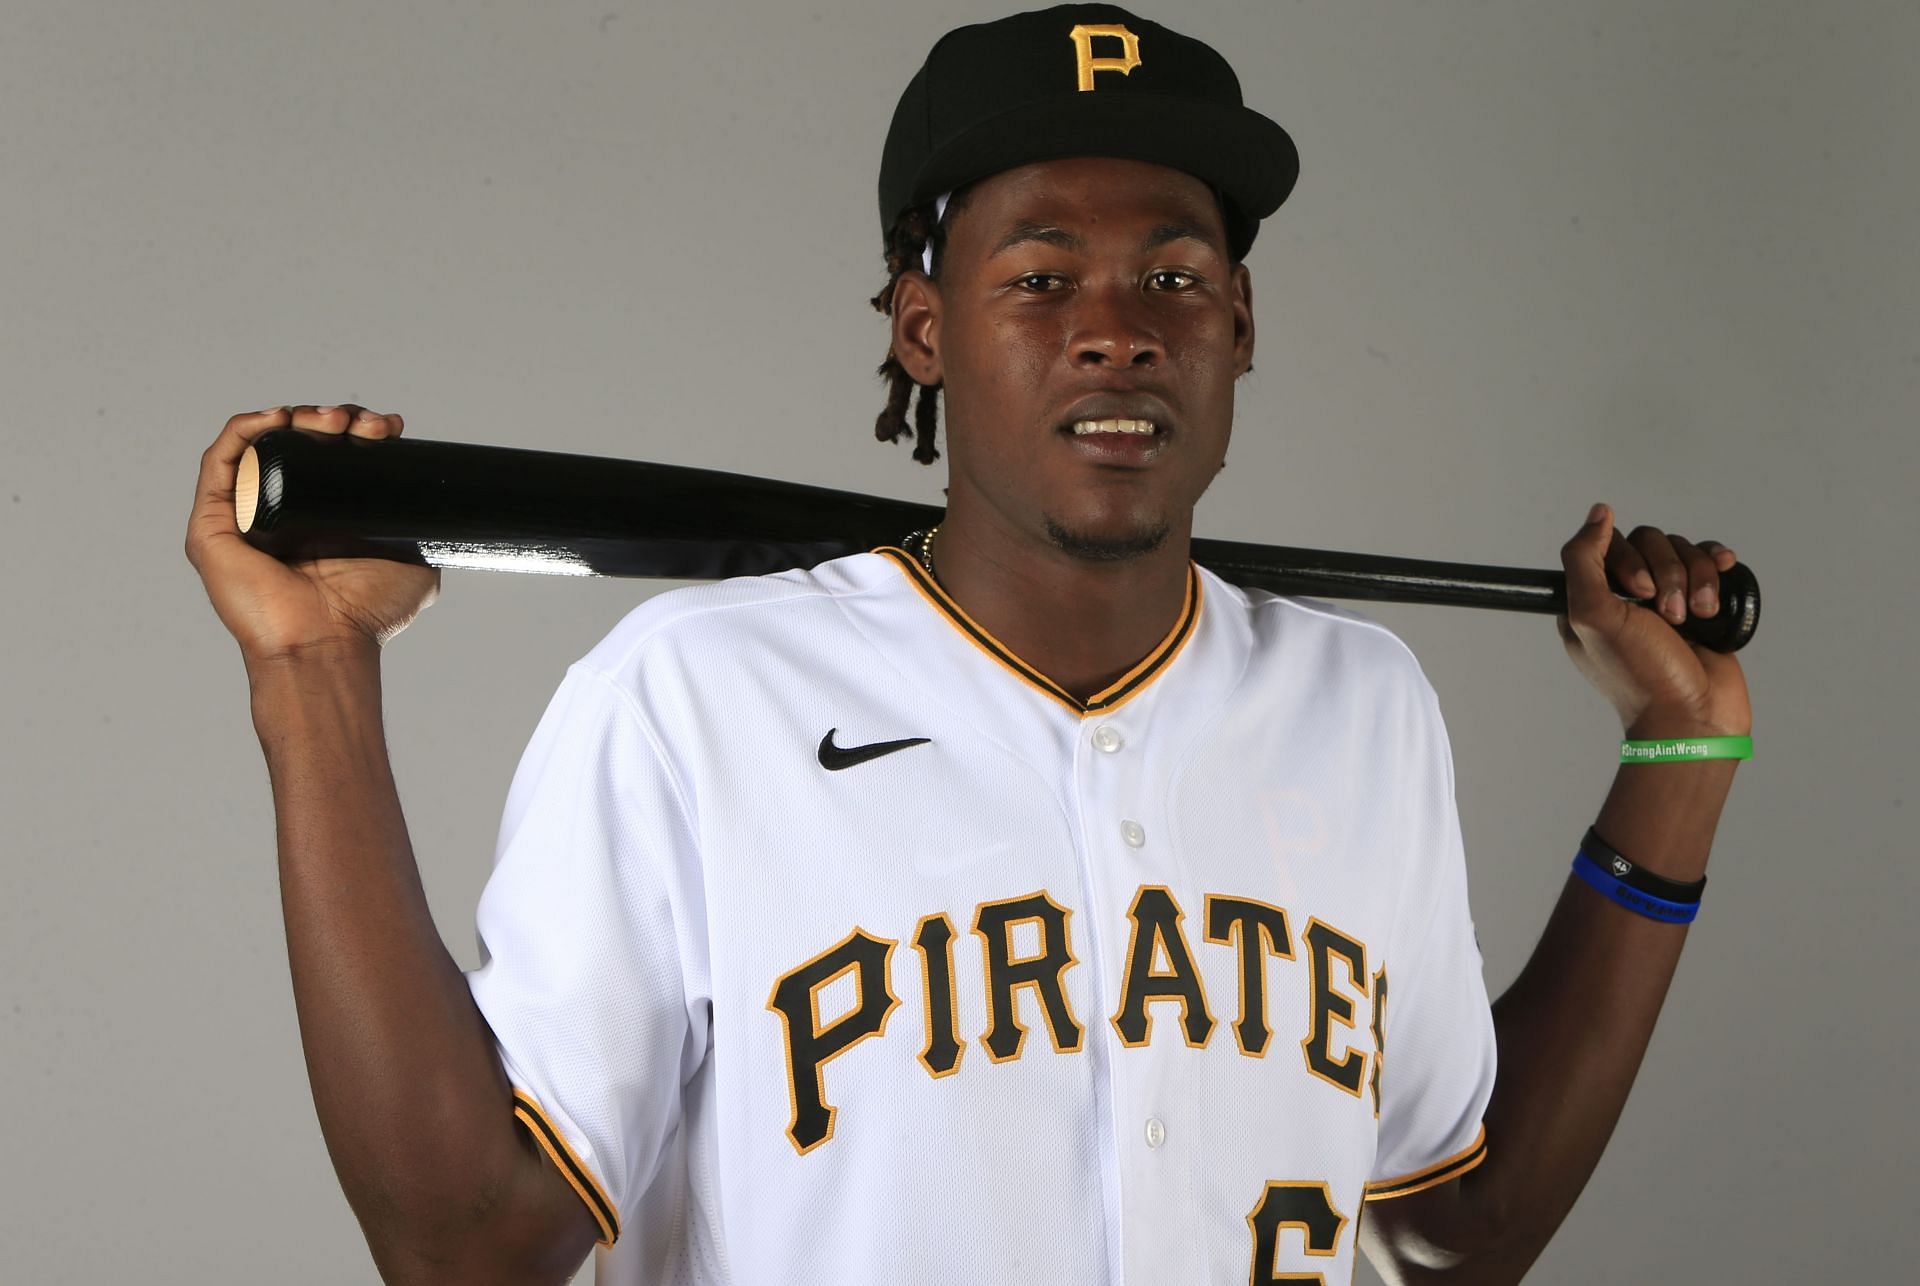 Is the outfield the right fit for Oneil Cruz? Pirates will restart